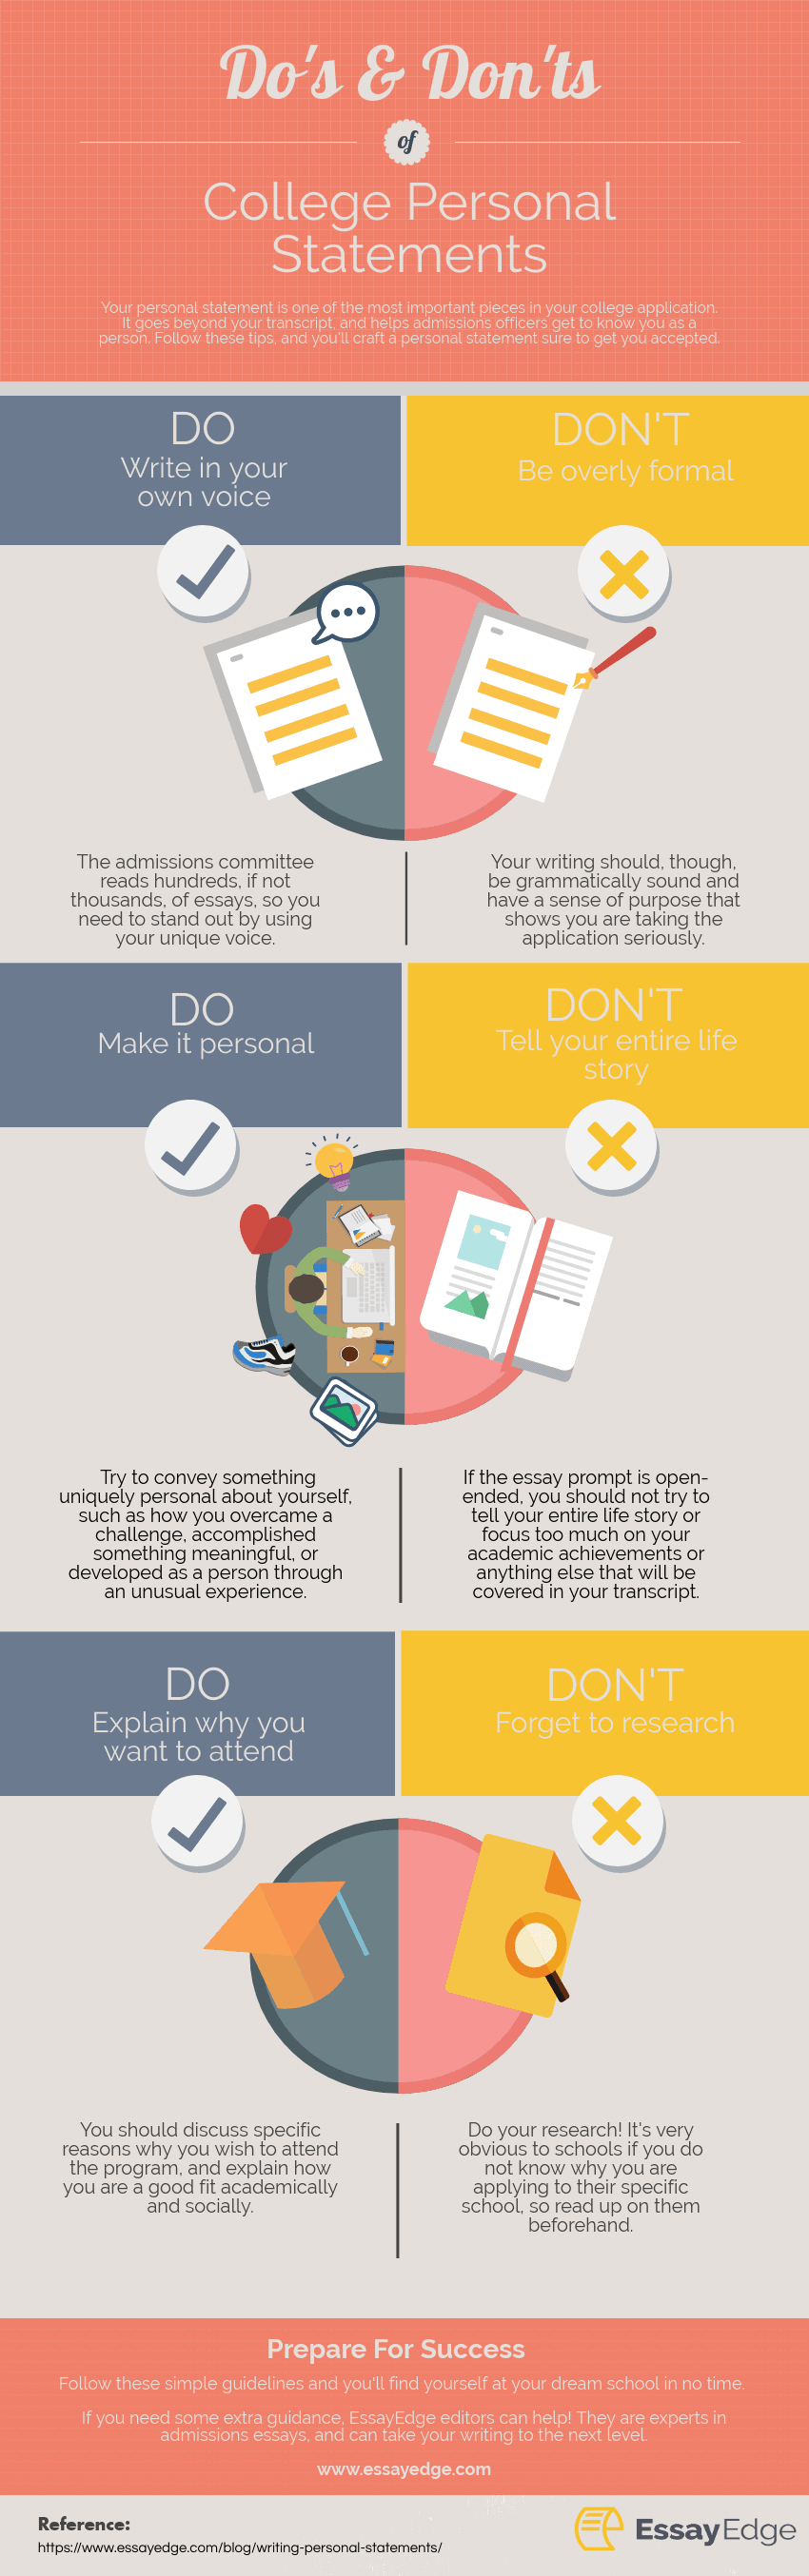 Do's and Don'ts Personal Statement guide